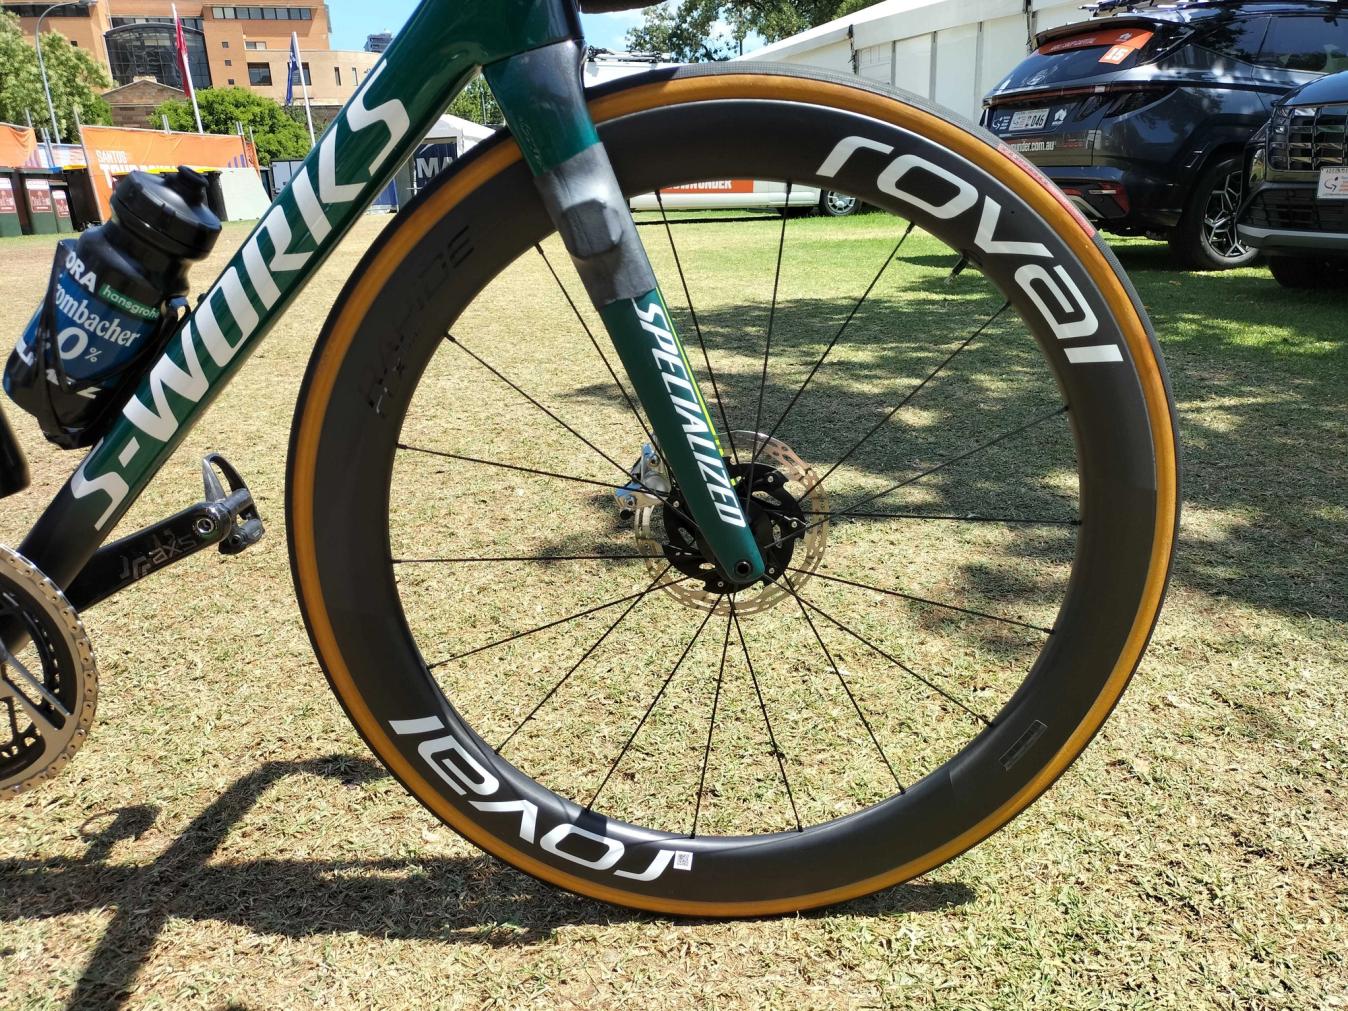 The Roval wheelset combines a 51mm front wheel with a 60mm rear